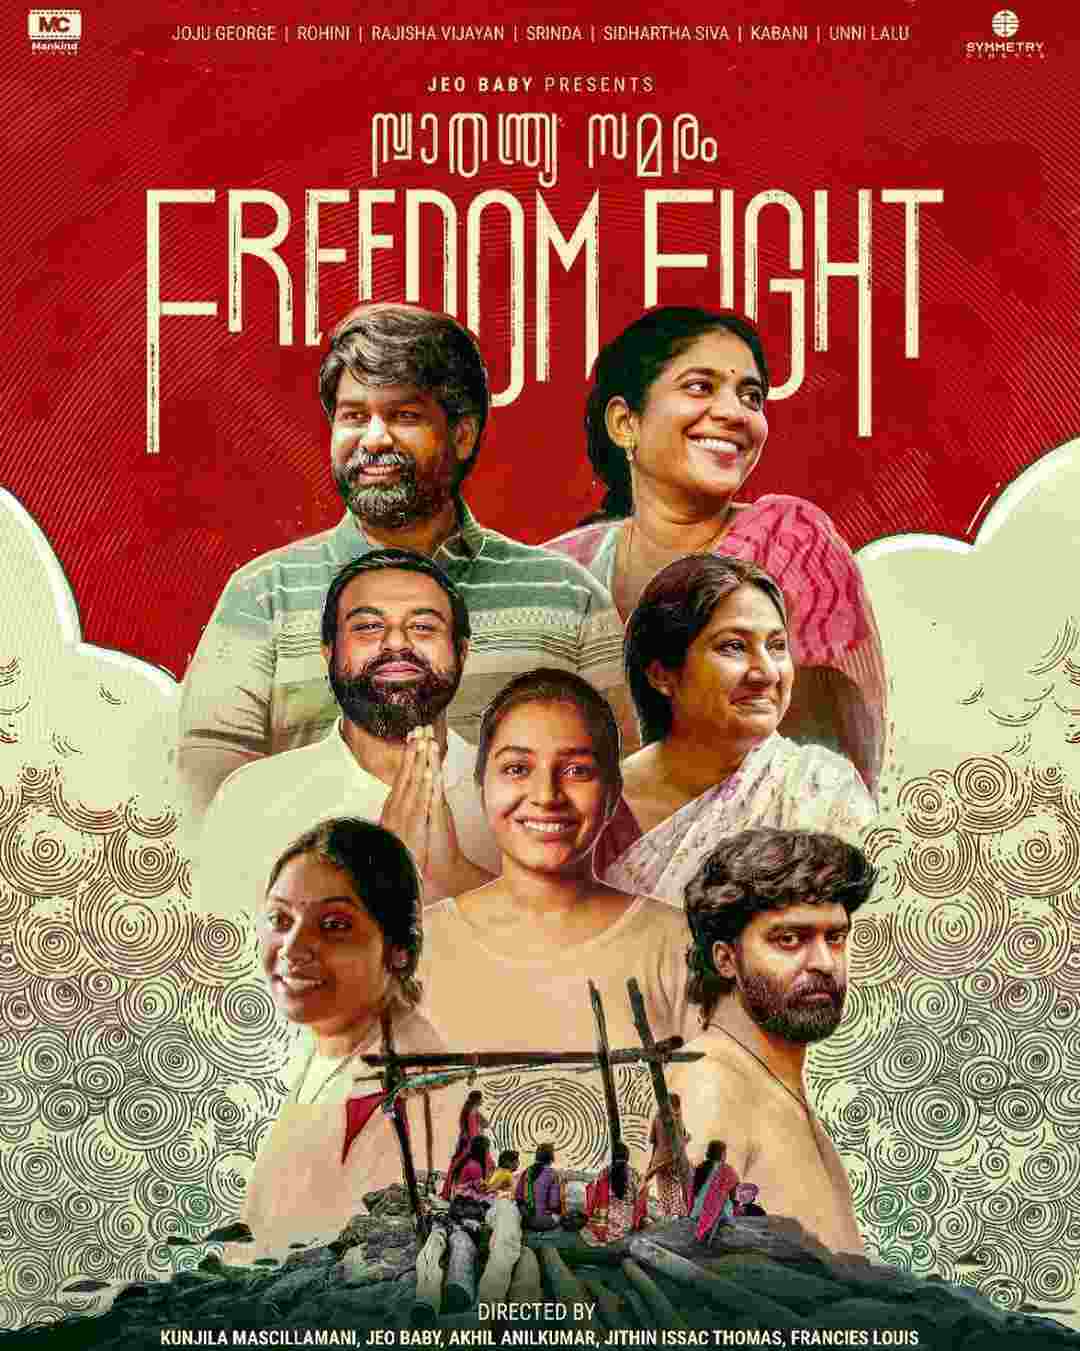 Freedom Fight Movie Review